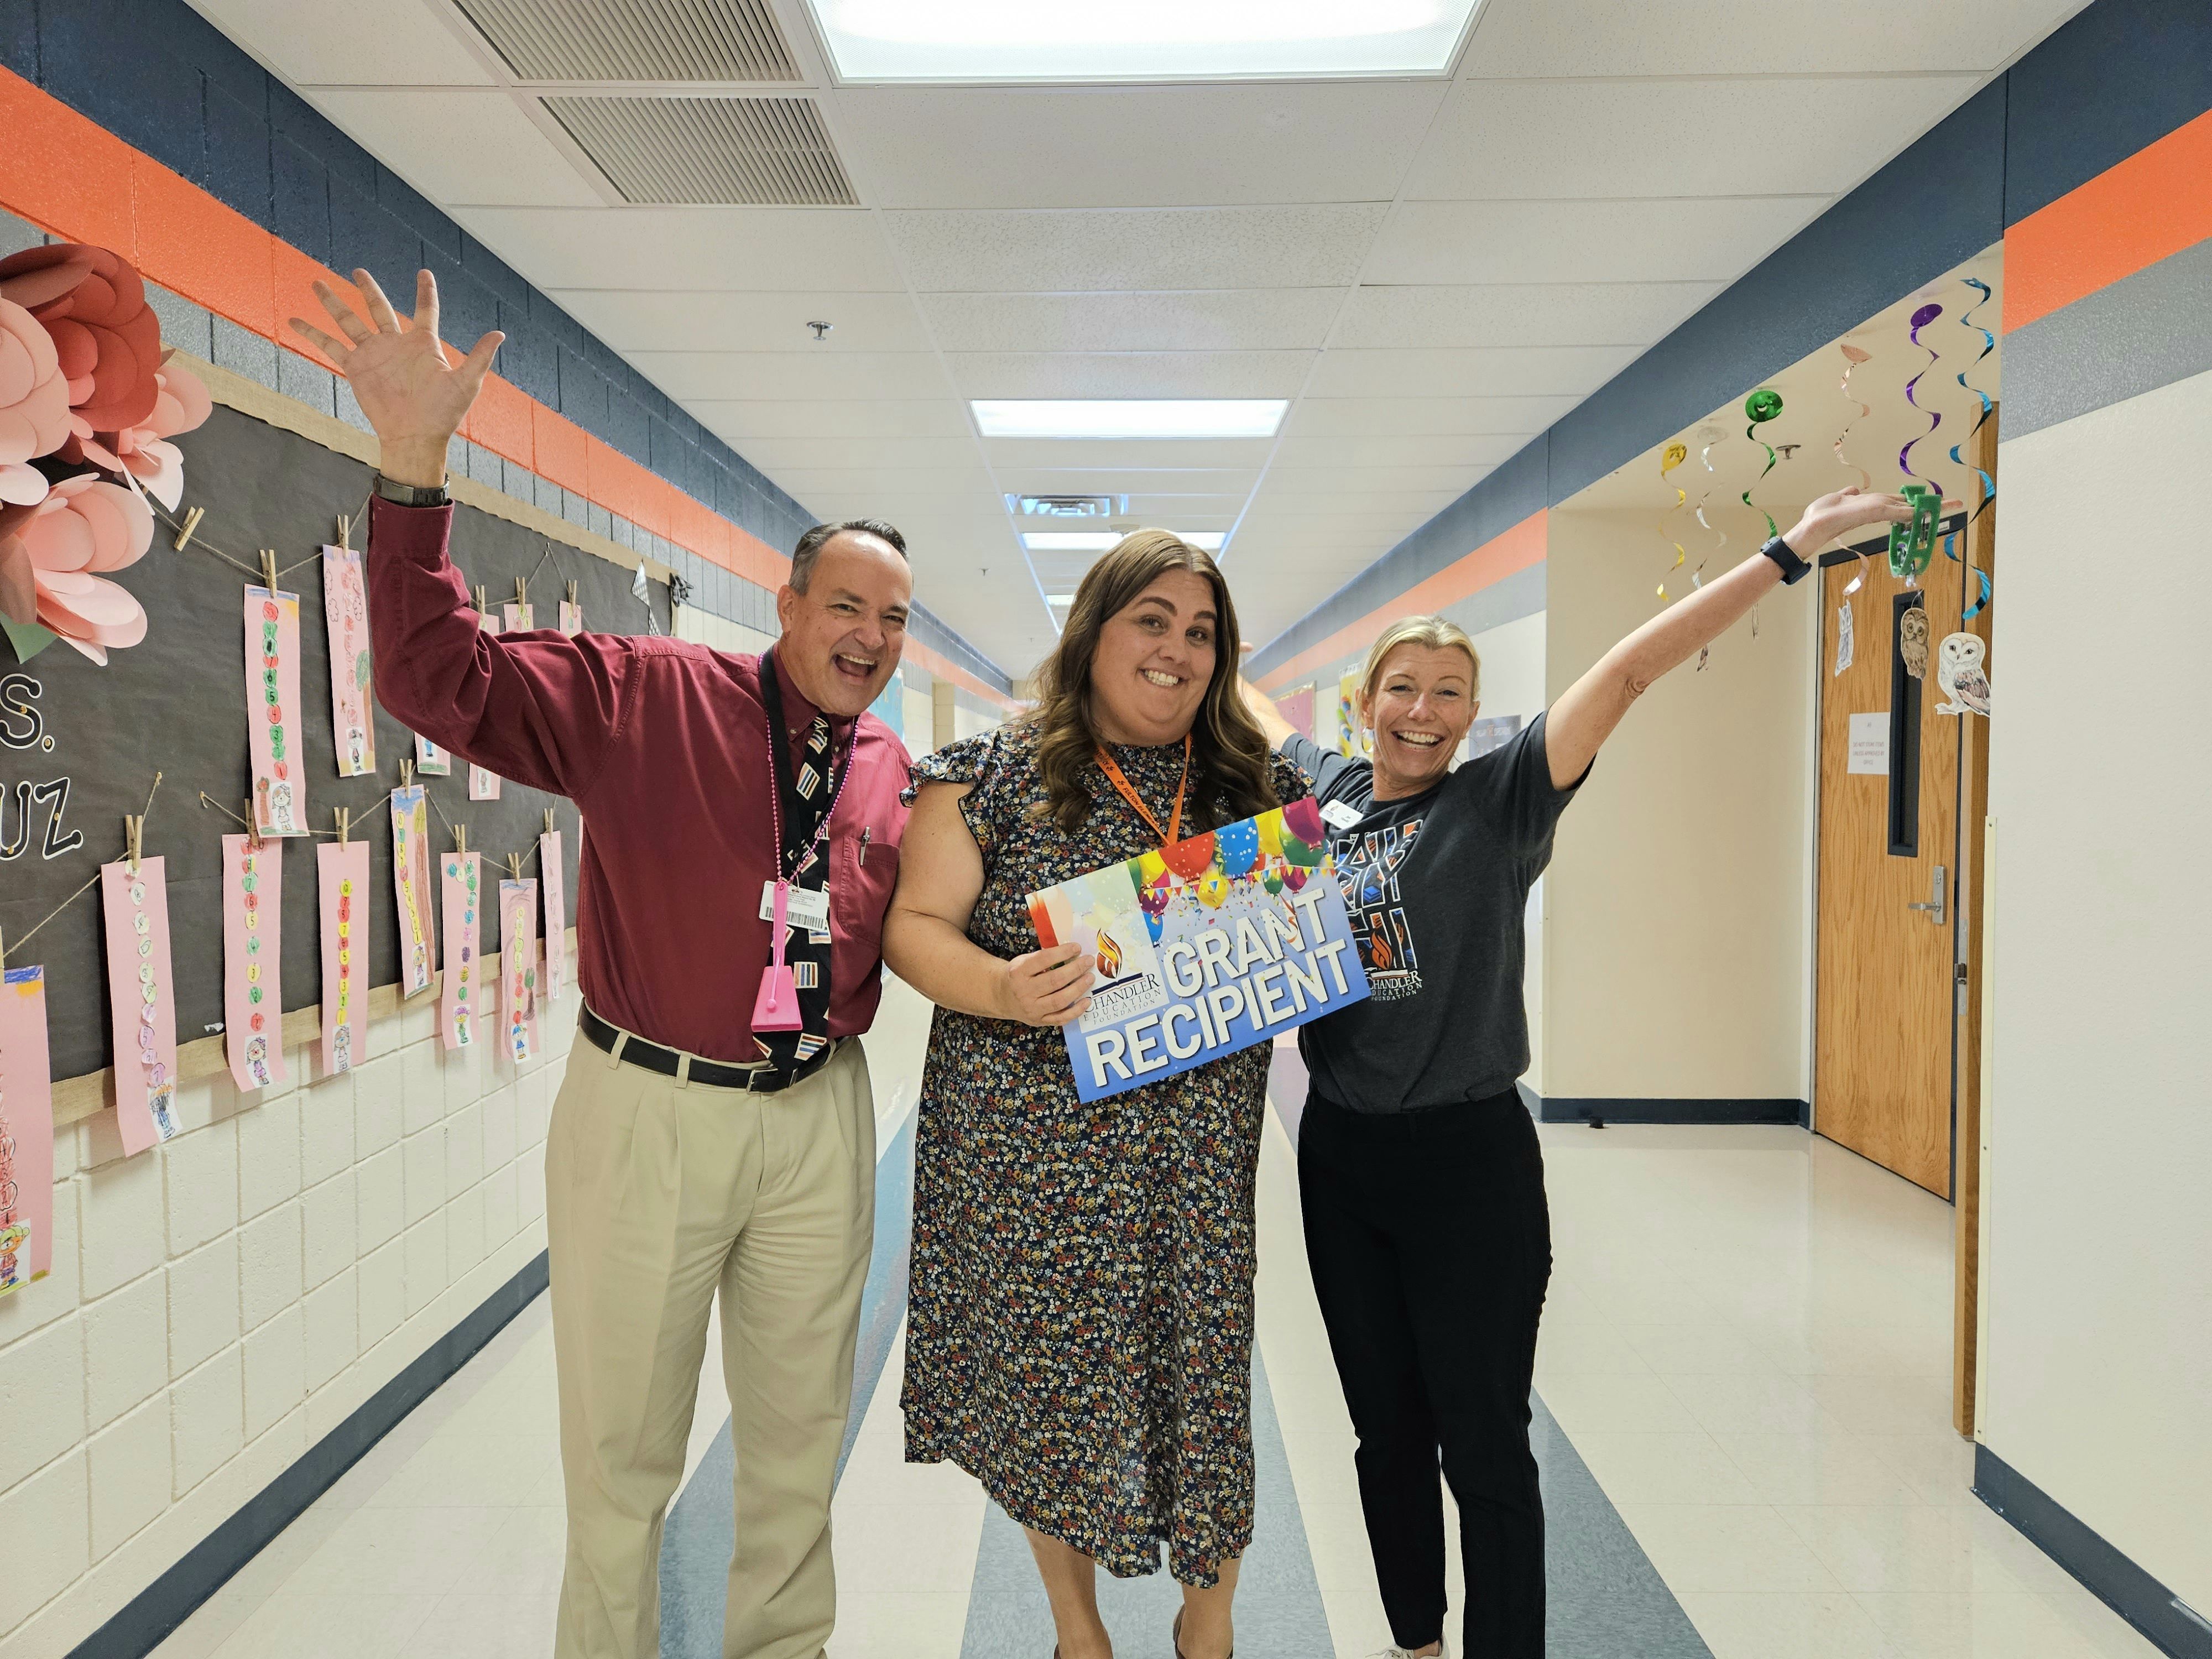 Mr Leo Schlueter, Executive Director of Elementary Education and Ms. Jen Hewitt, Executive Director of the Chandler Education Foundation presenting an enrichment grant for special education sensory resources to Ms. Gross of Fulton Elementary School. 